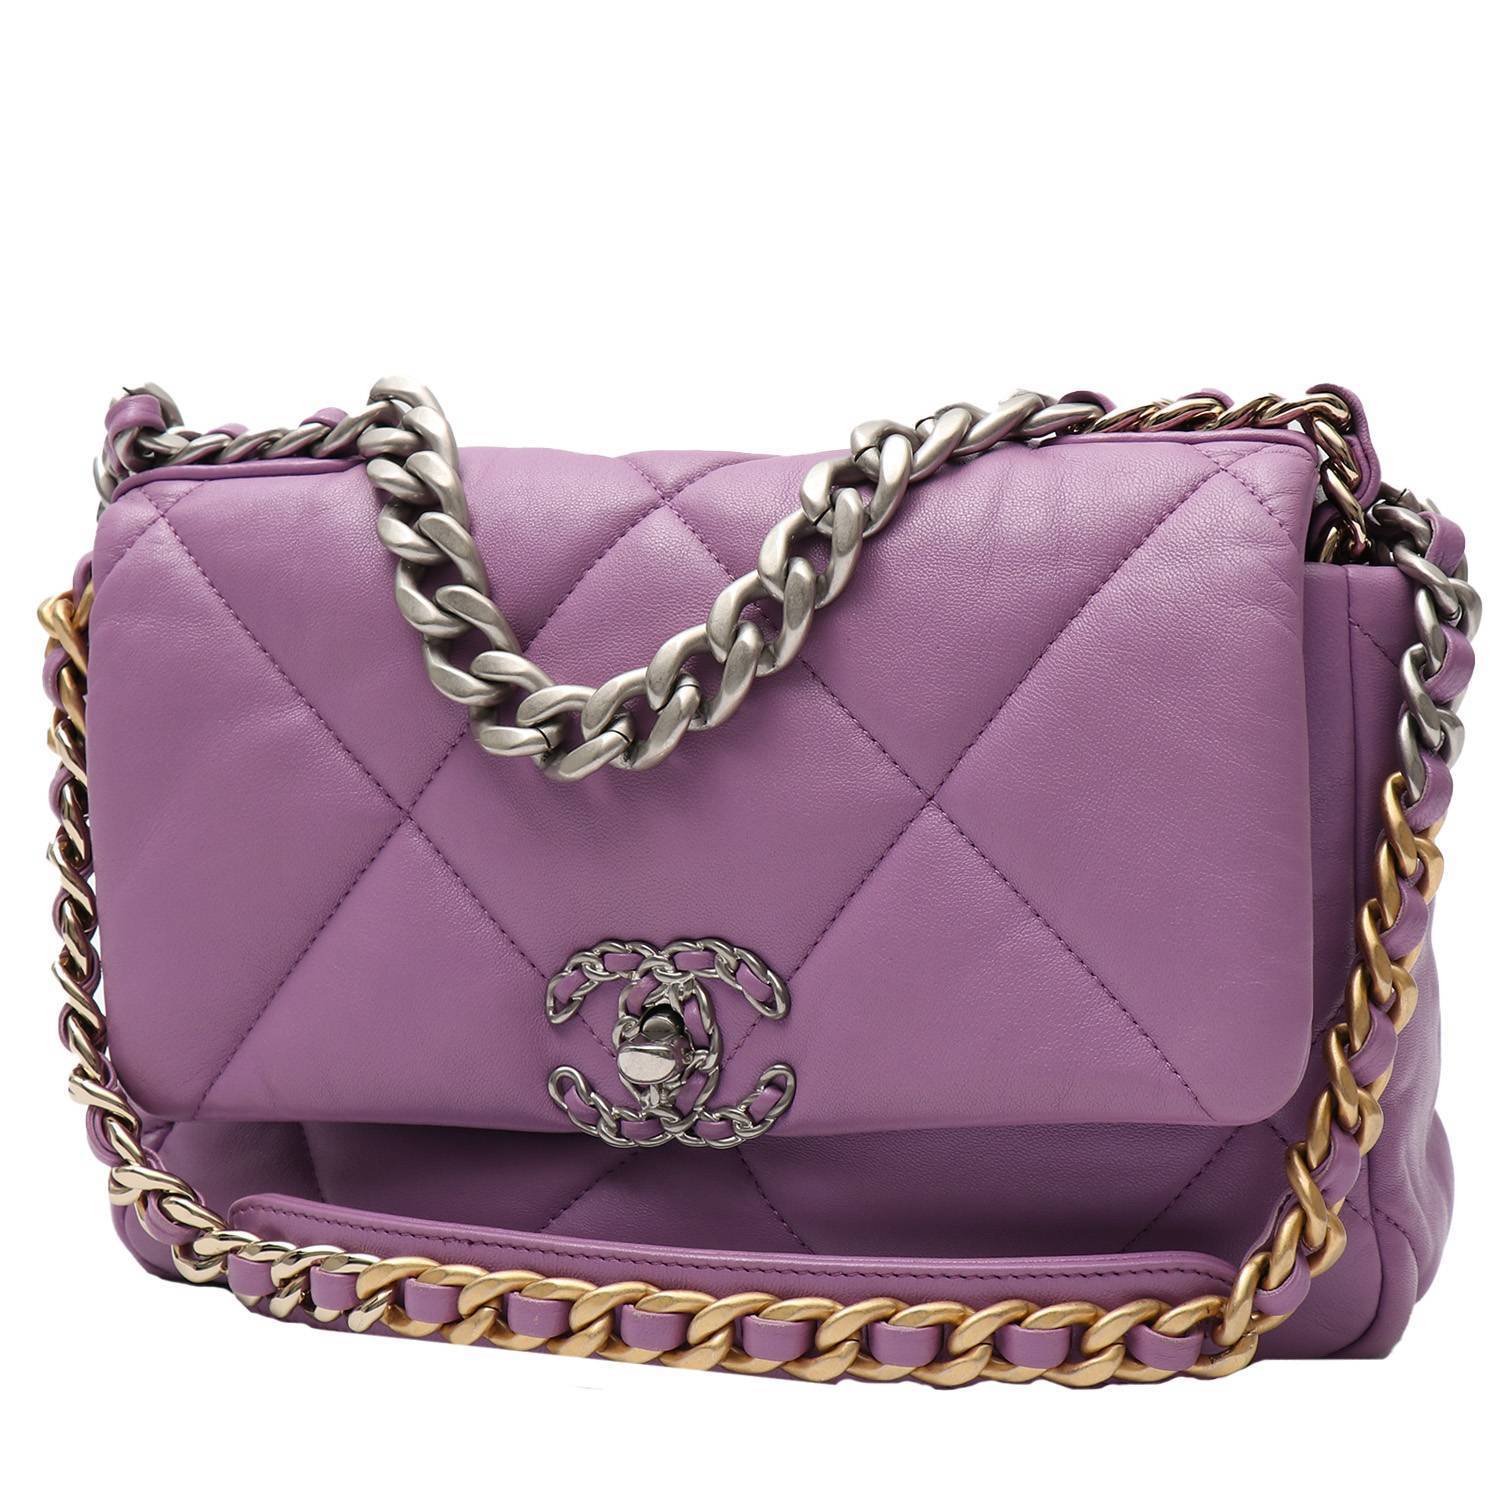 Chanel 19 Shoulder Bag in Purple Quilted Leather